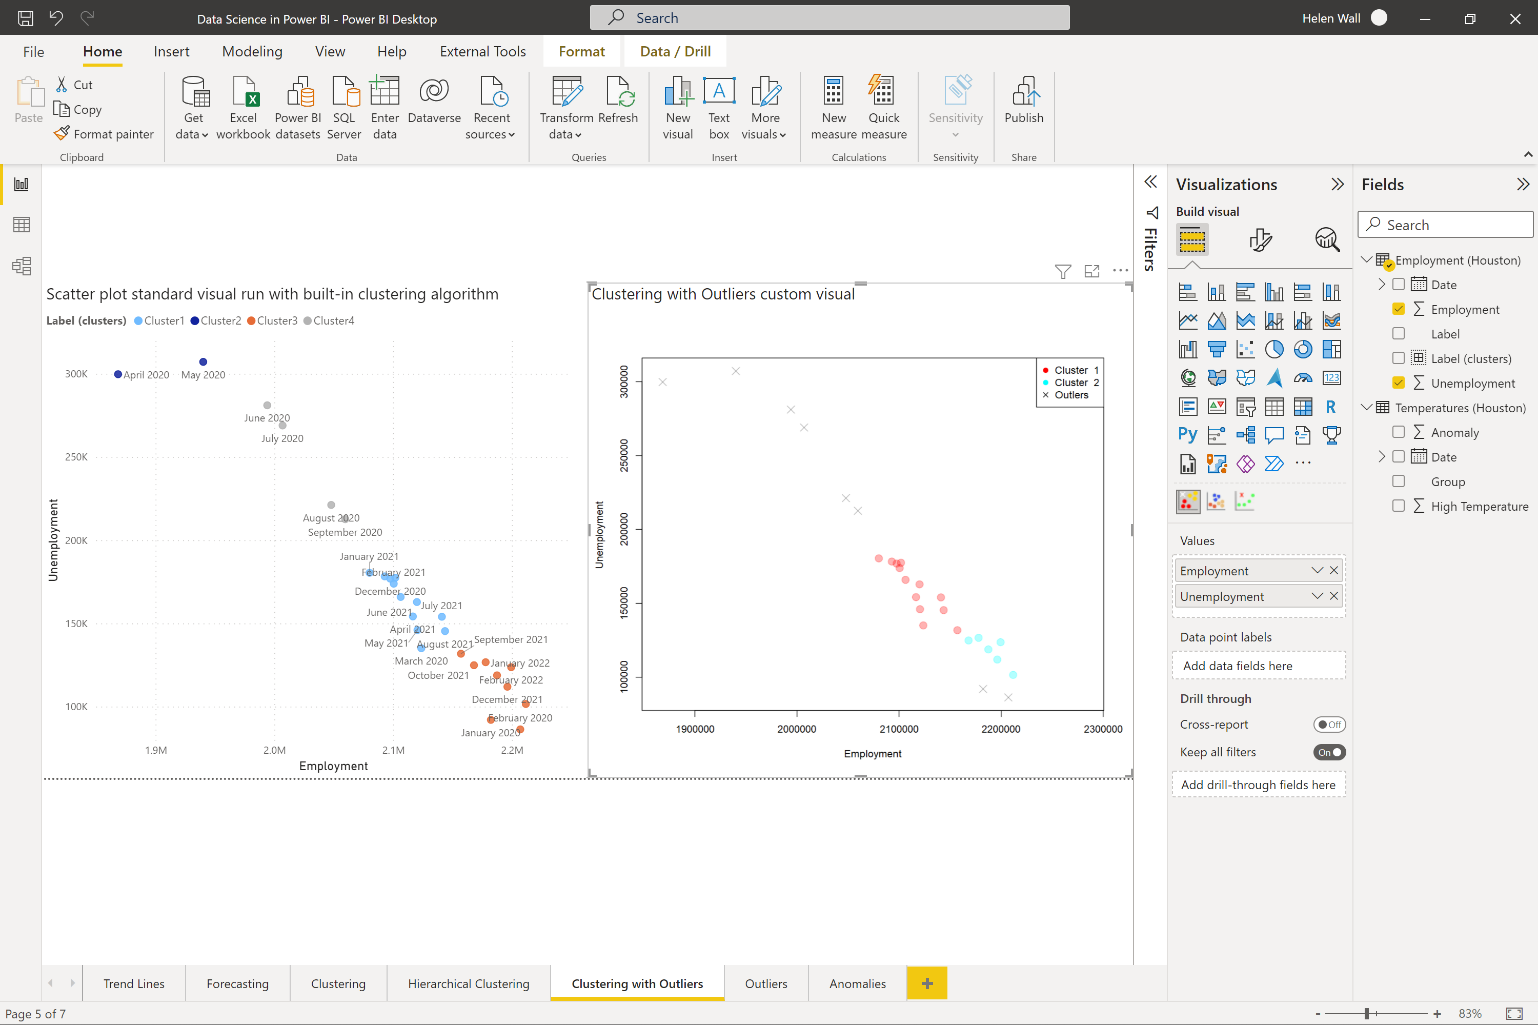 Figure 6: Clustering with outlier custom visual